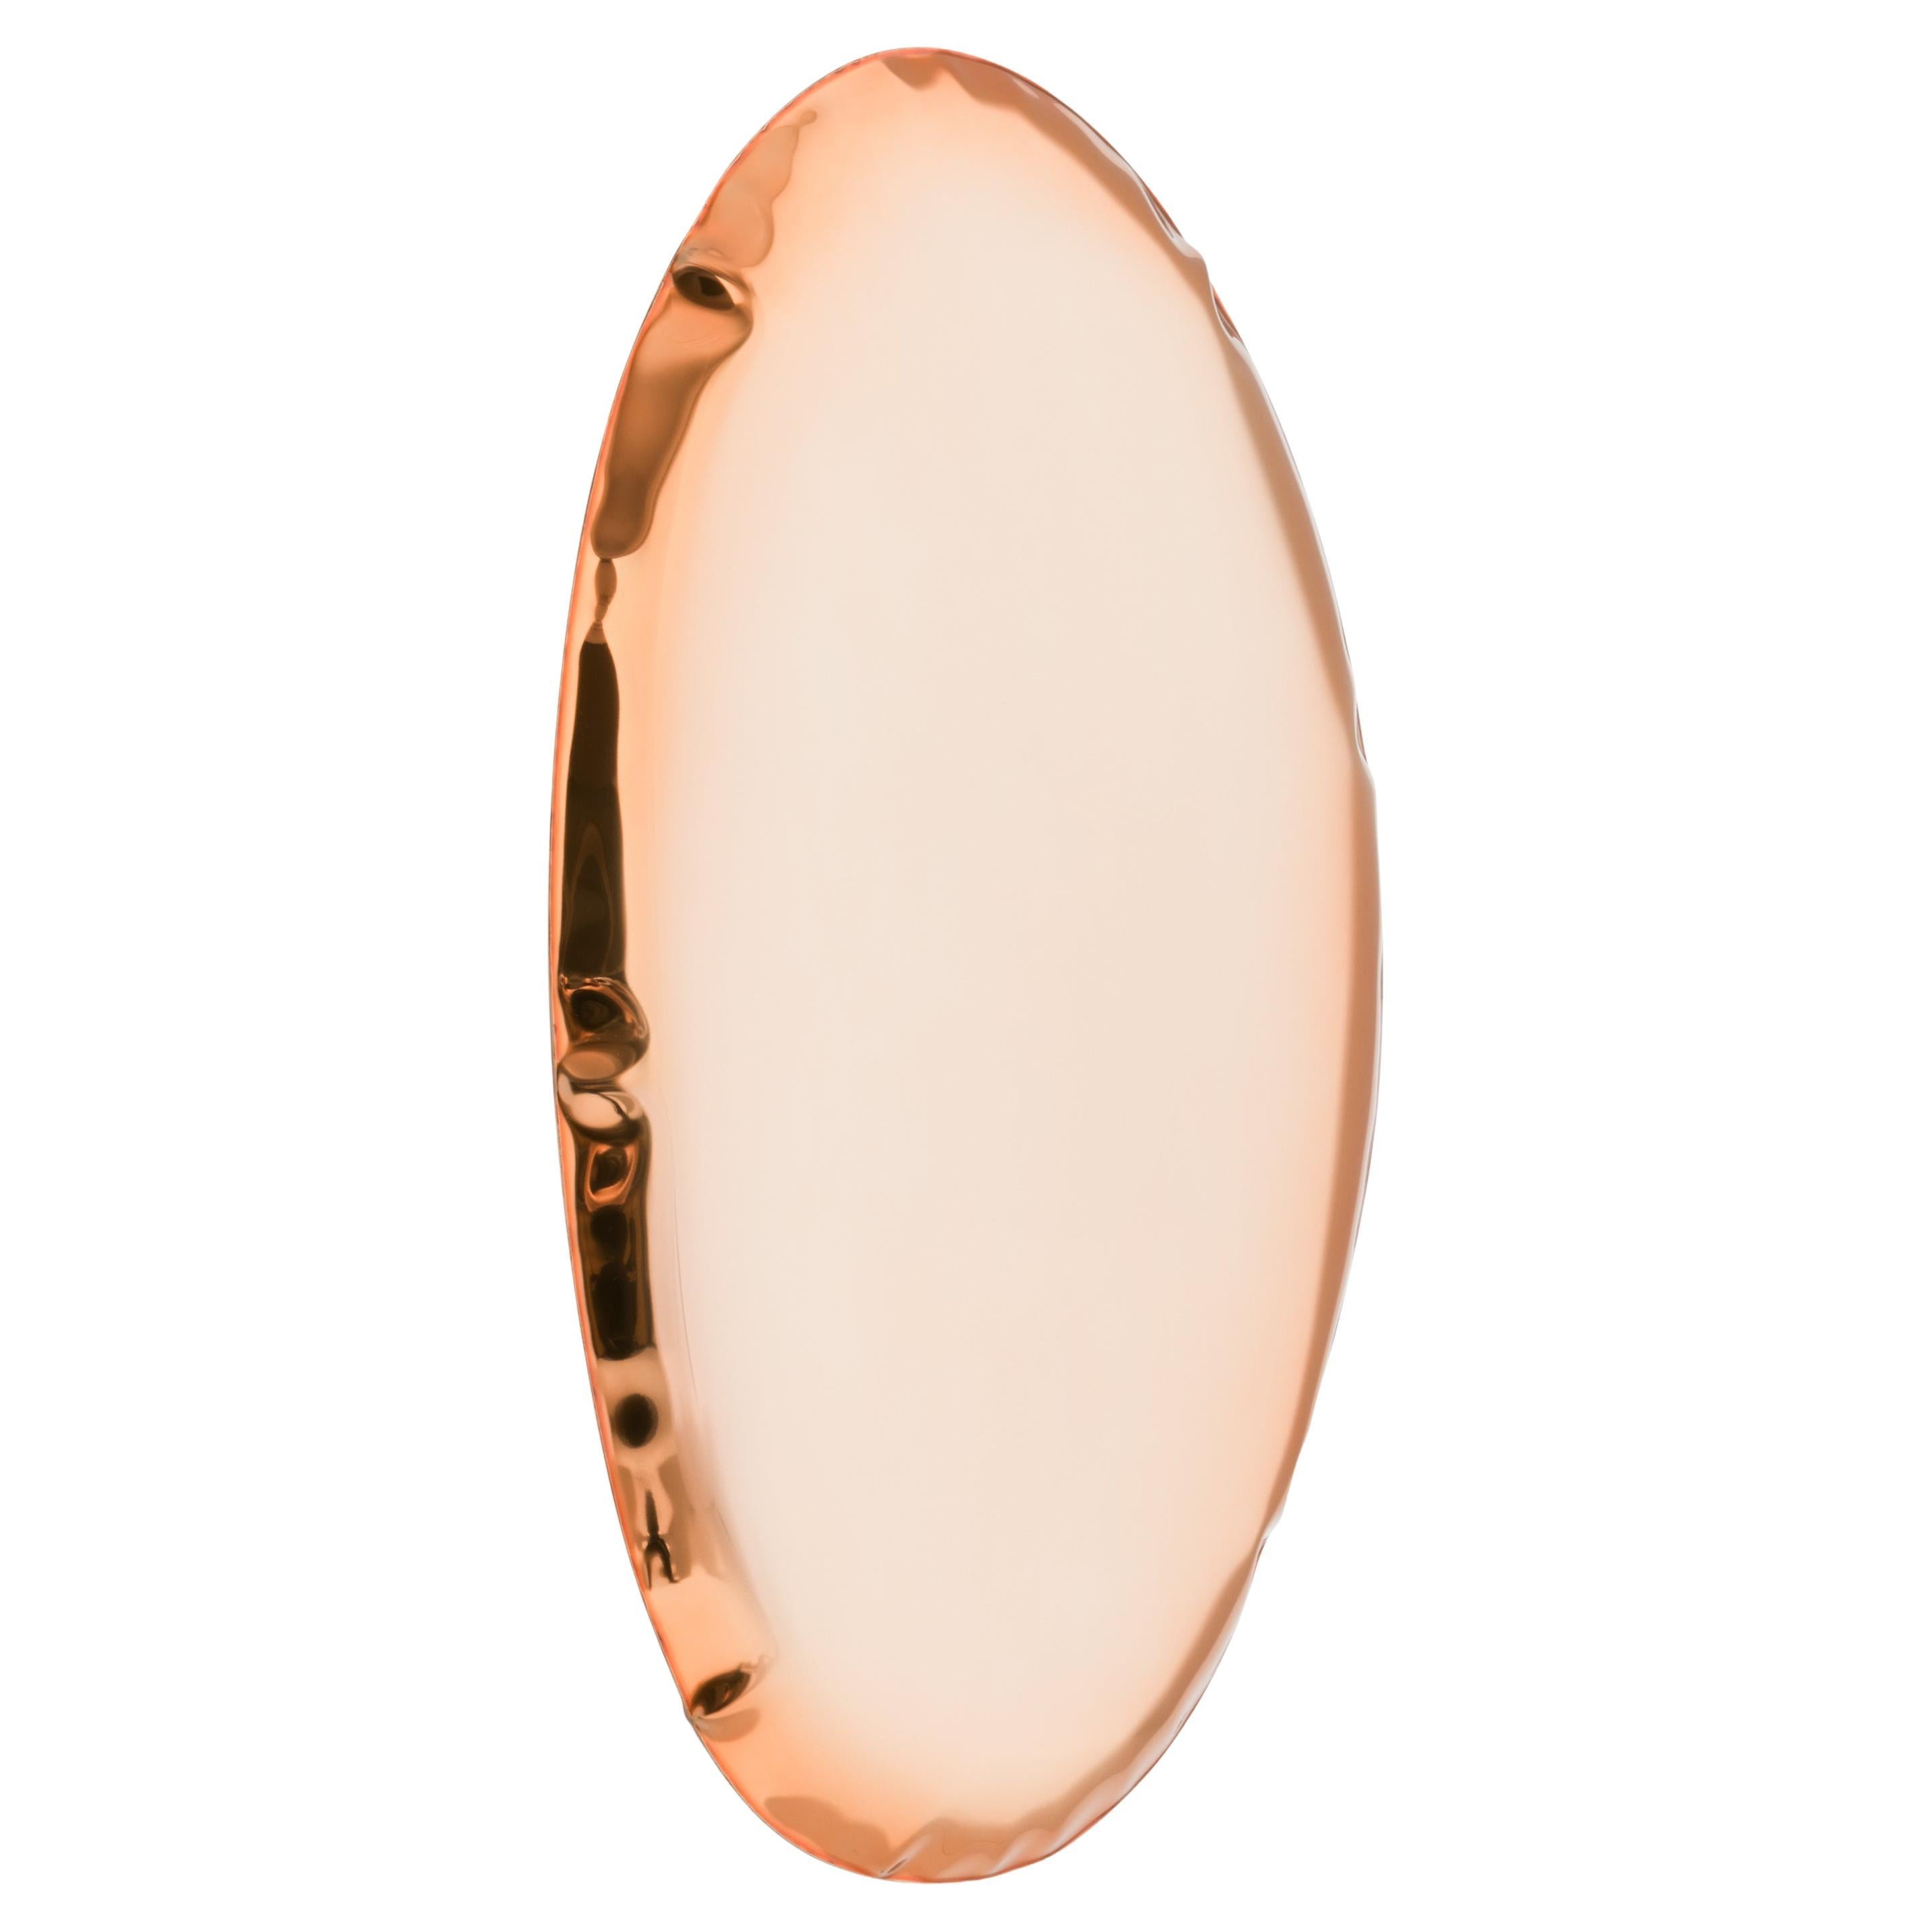 Tafla O5 Polished Stainless Steel Rose Gold Color Wall Mirror by Zieta For Sale